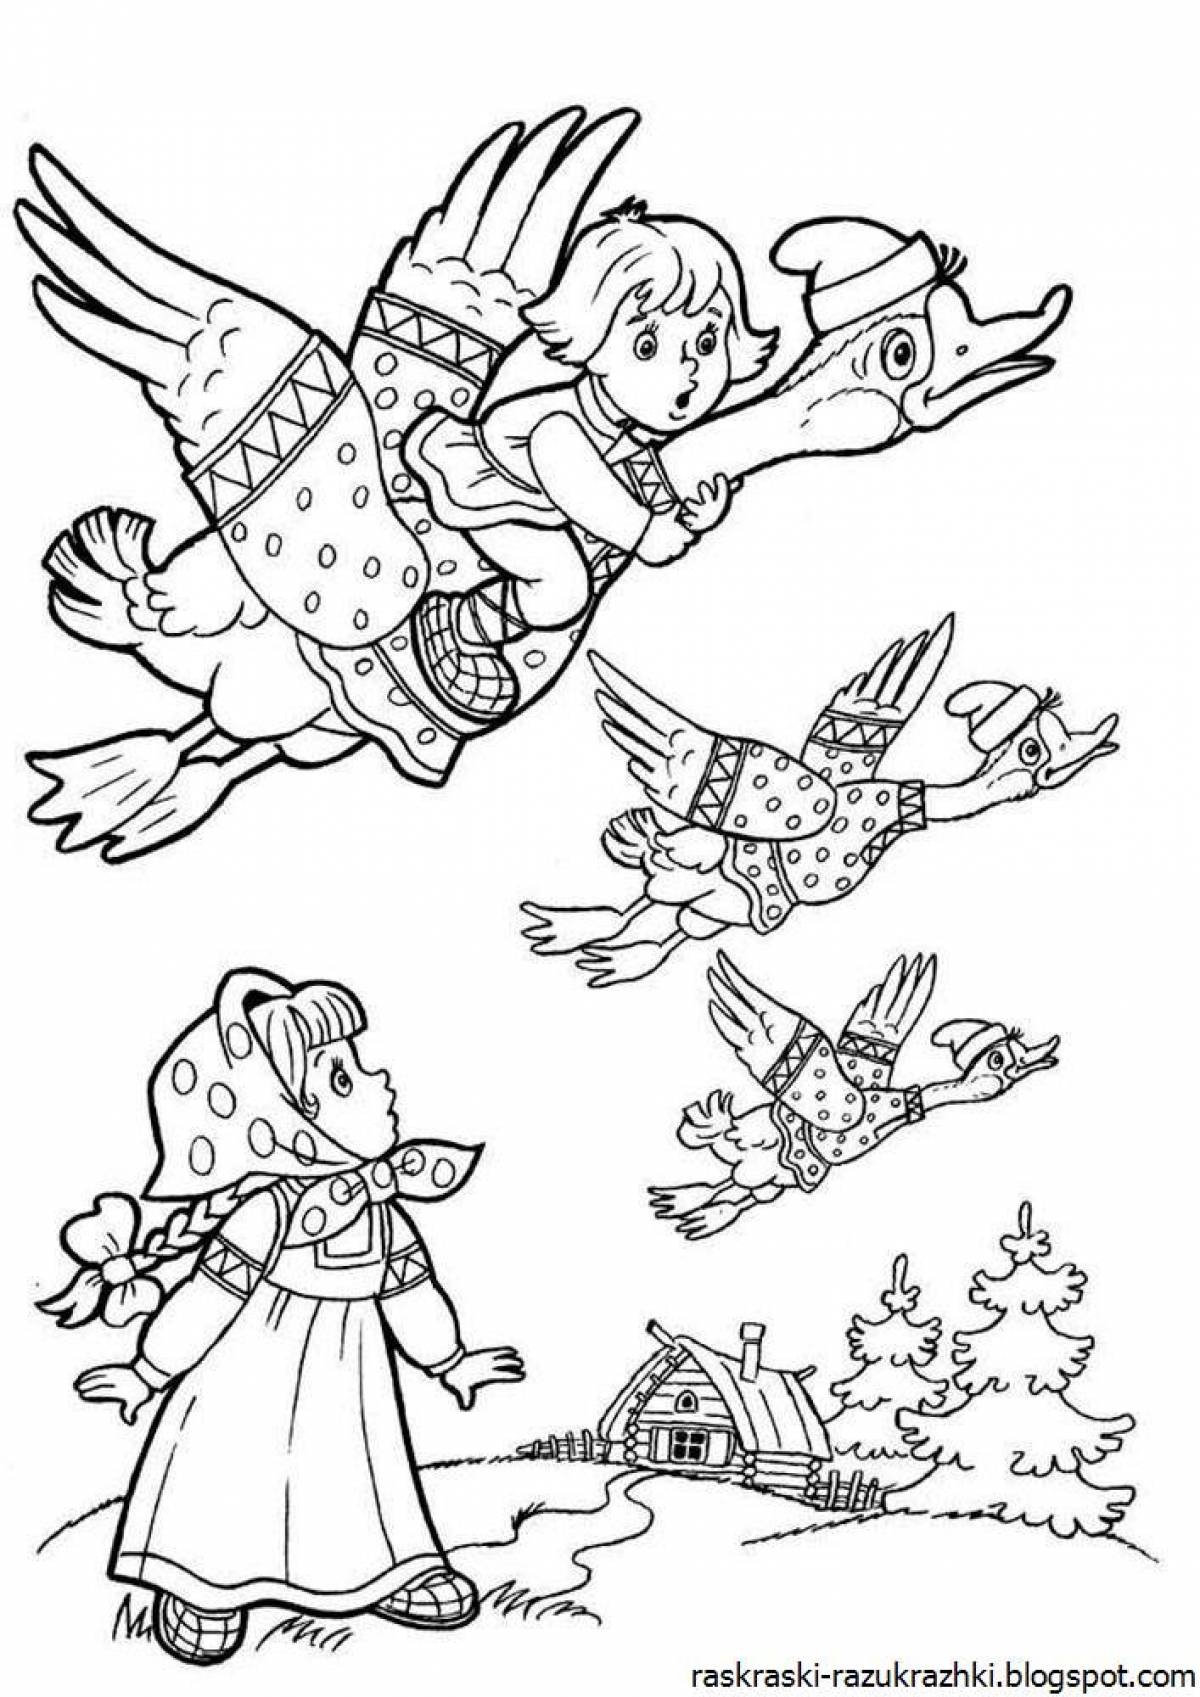 Coloring page beautiful swan geese